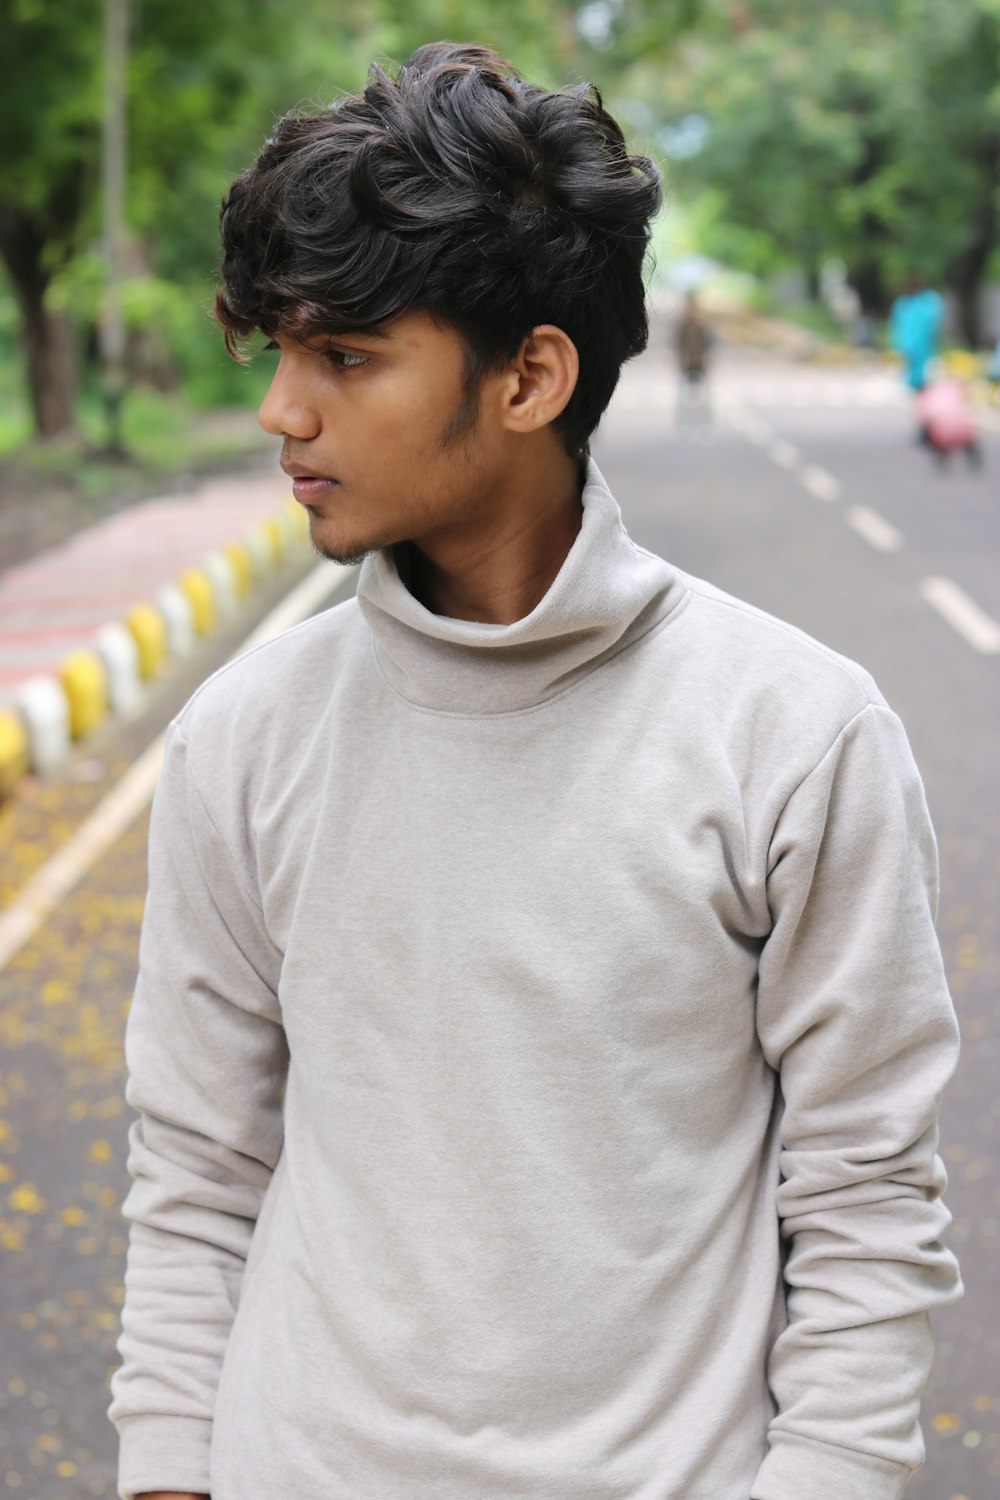 man in gray sweater standing on road during daytime